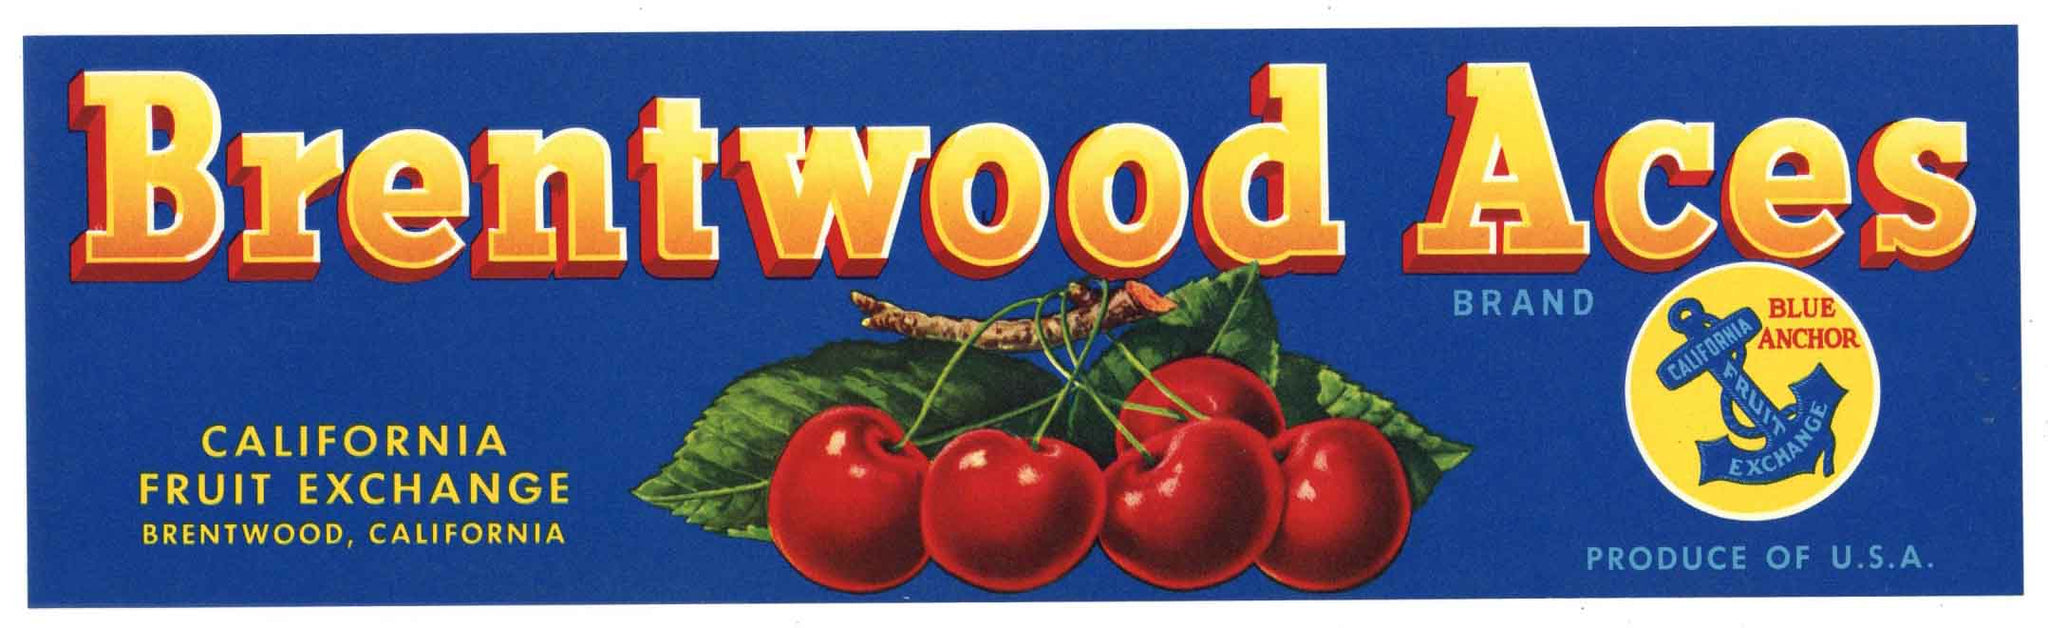 Brentwood Aces Brand Vintage Cherry Crate Label